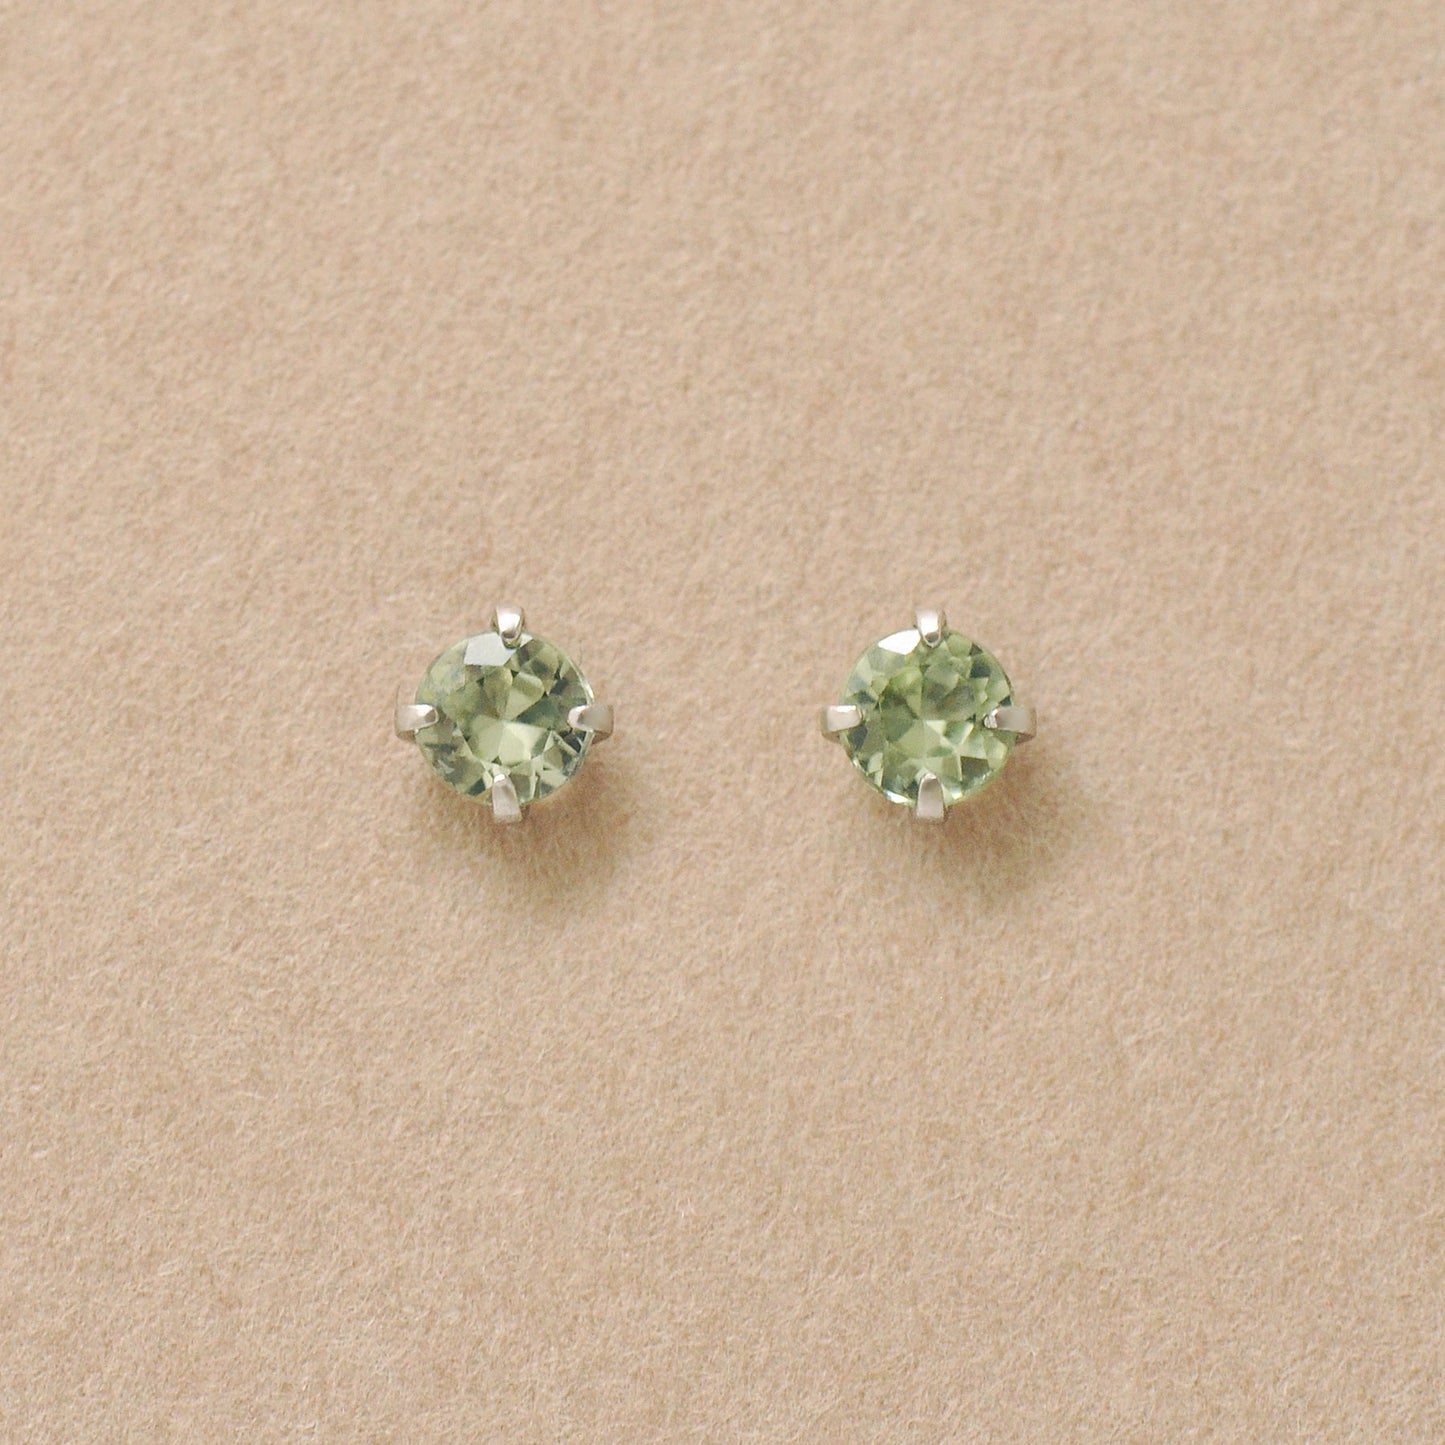 [Second Earrings] Platinum Green Sapphire Earrings - Product Image